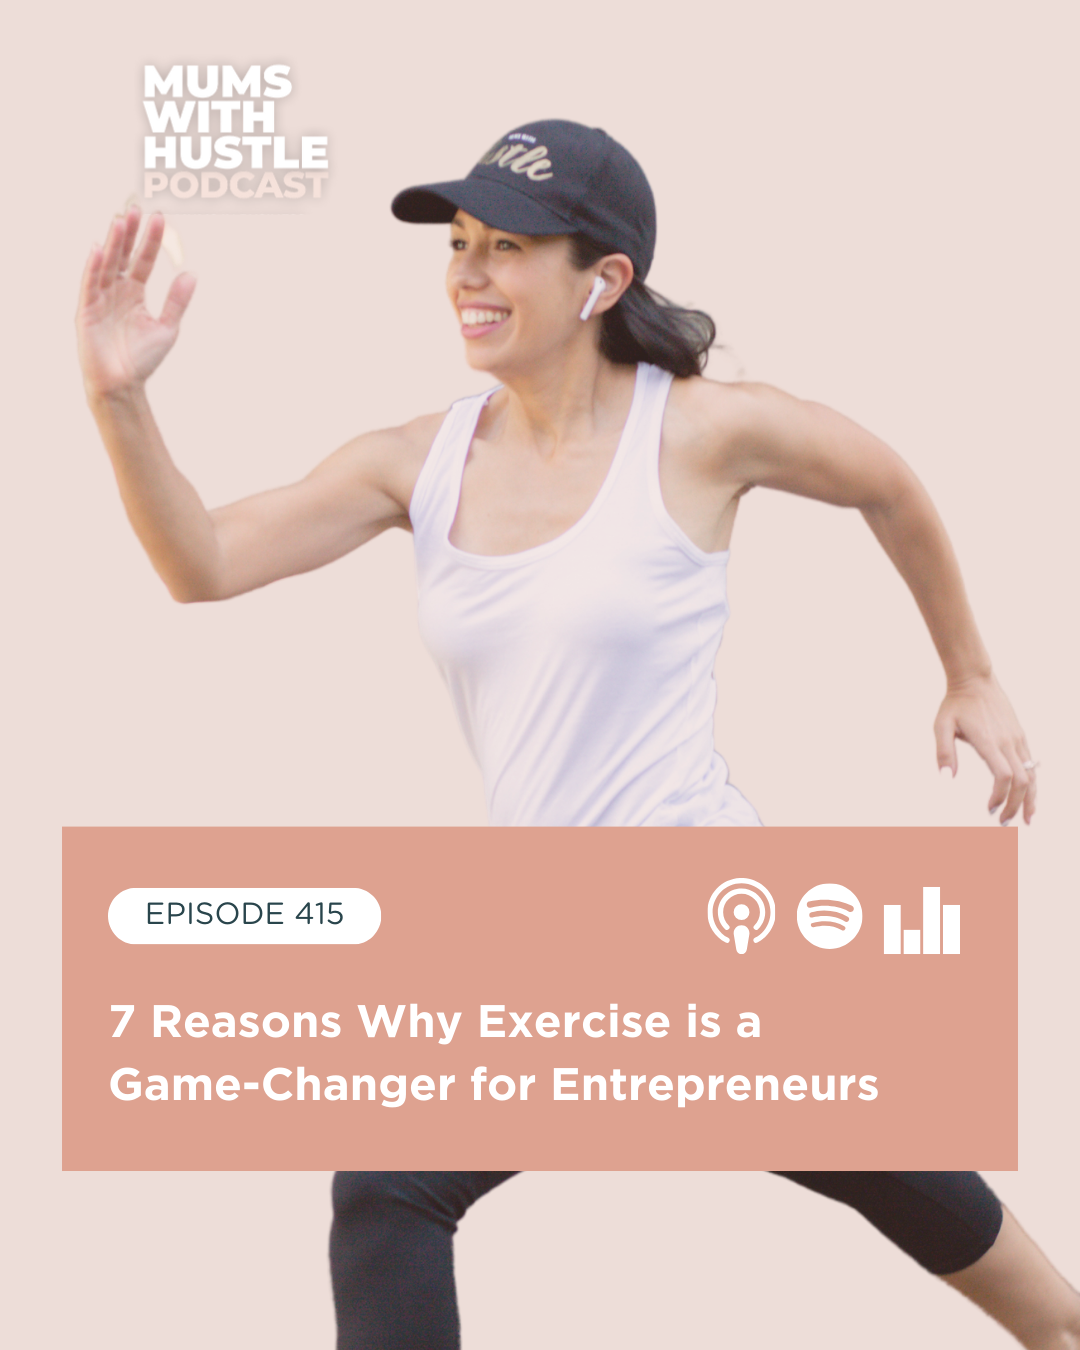 7 Reasons Why Exercise is a Game-Changer for Entrepreneurs